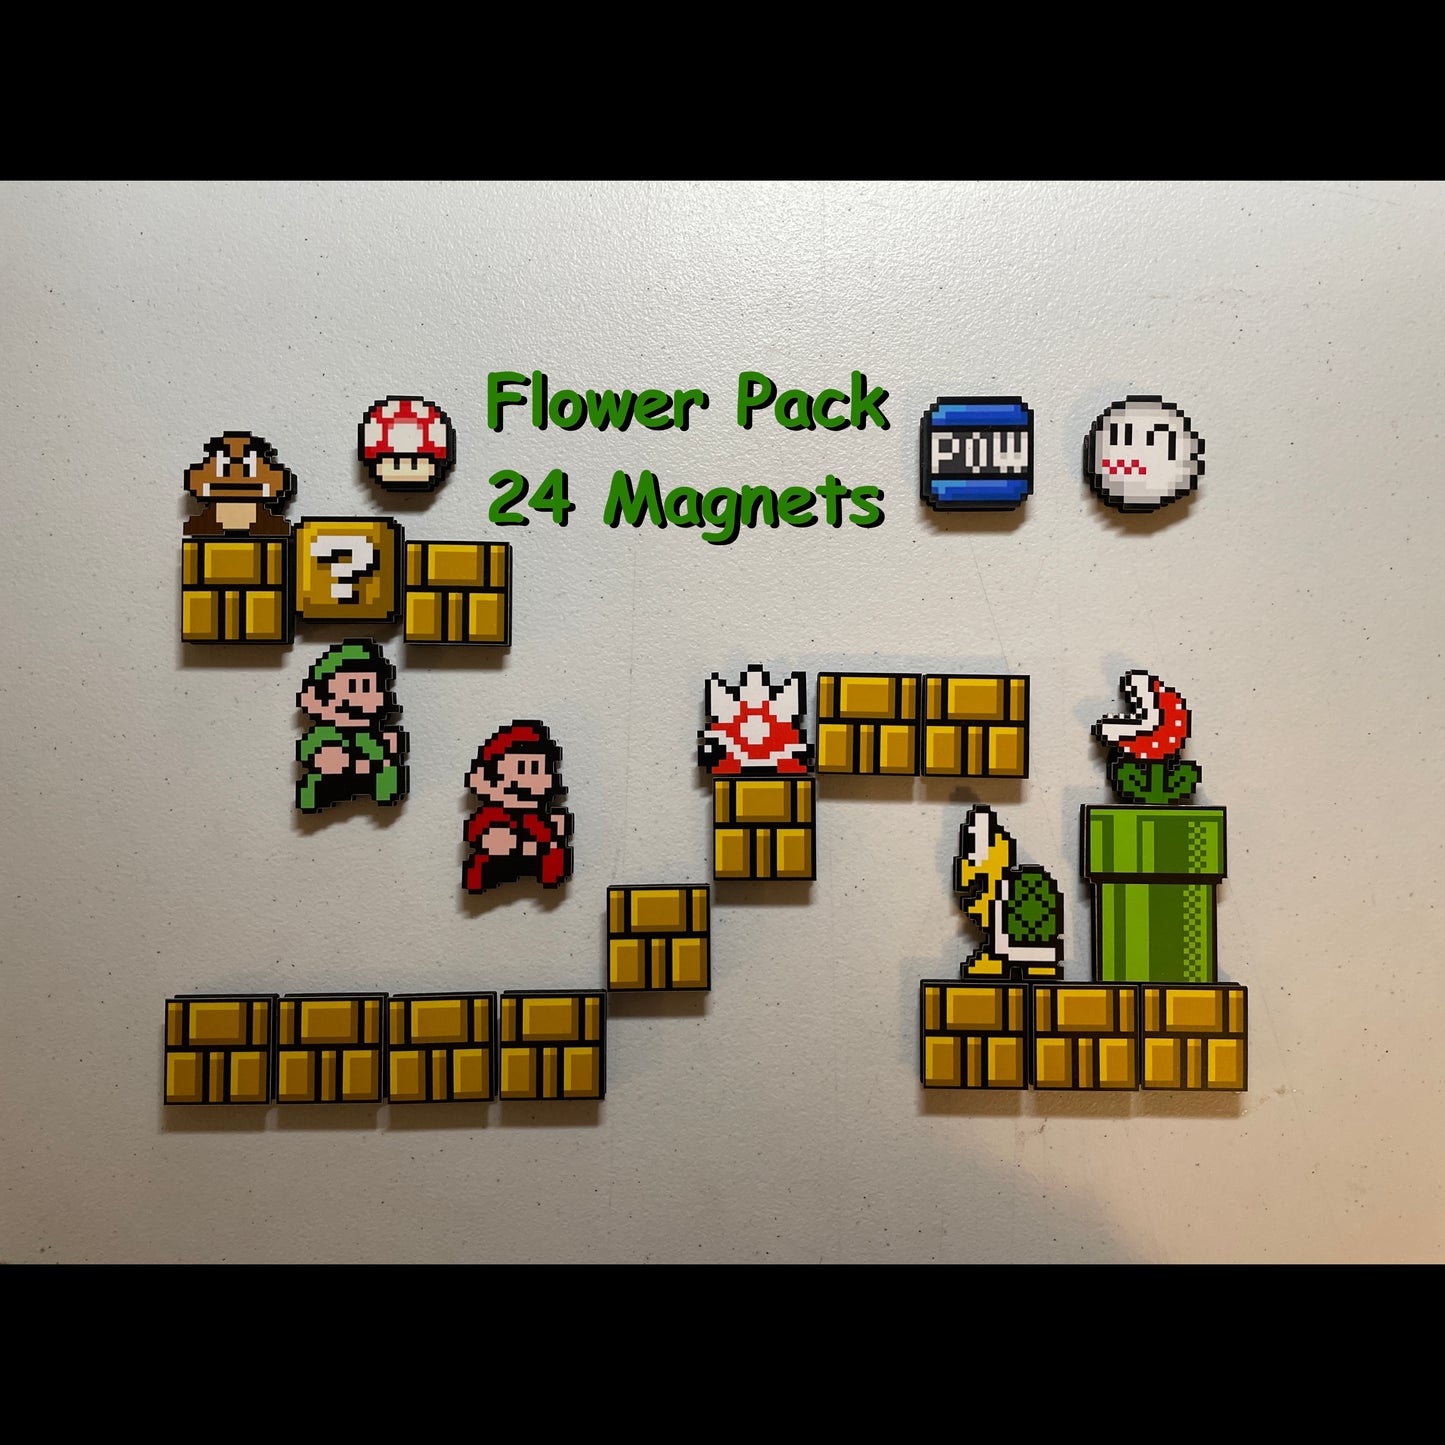 Flower Pack - Magnets - Nintendo Super Mario Brothers 3!